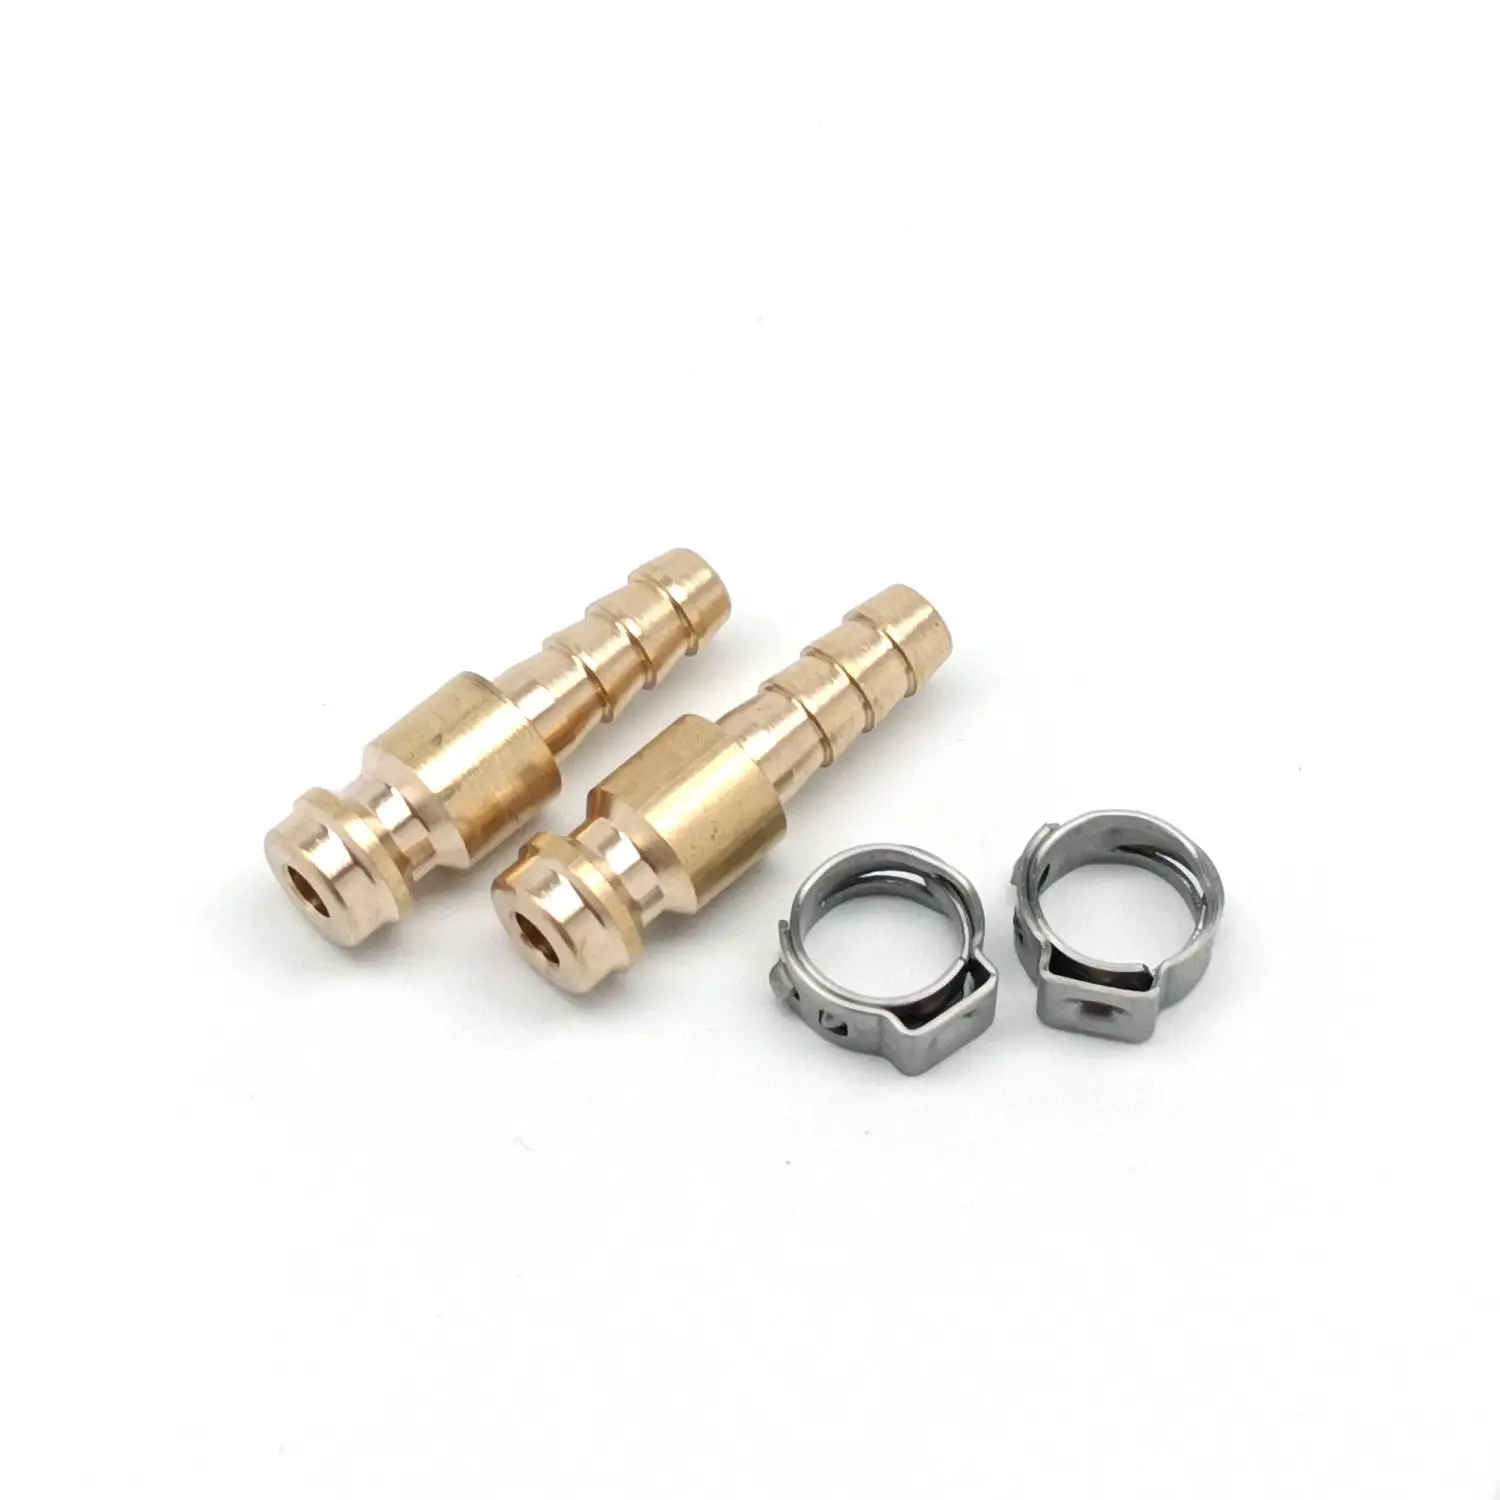 Fit Inside 5mm Outside 8mm Hose Pipe Water Cooled Gas Adapter Quick Connector 501D WP-18 TIG MIG Welder Part Welding Torch Plug